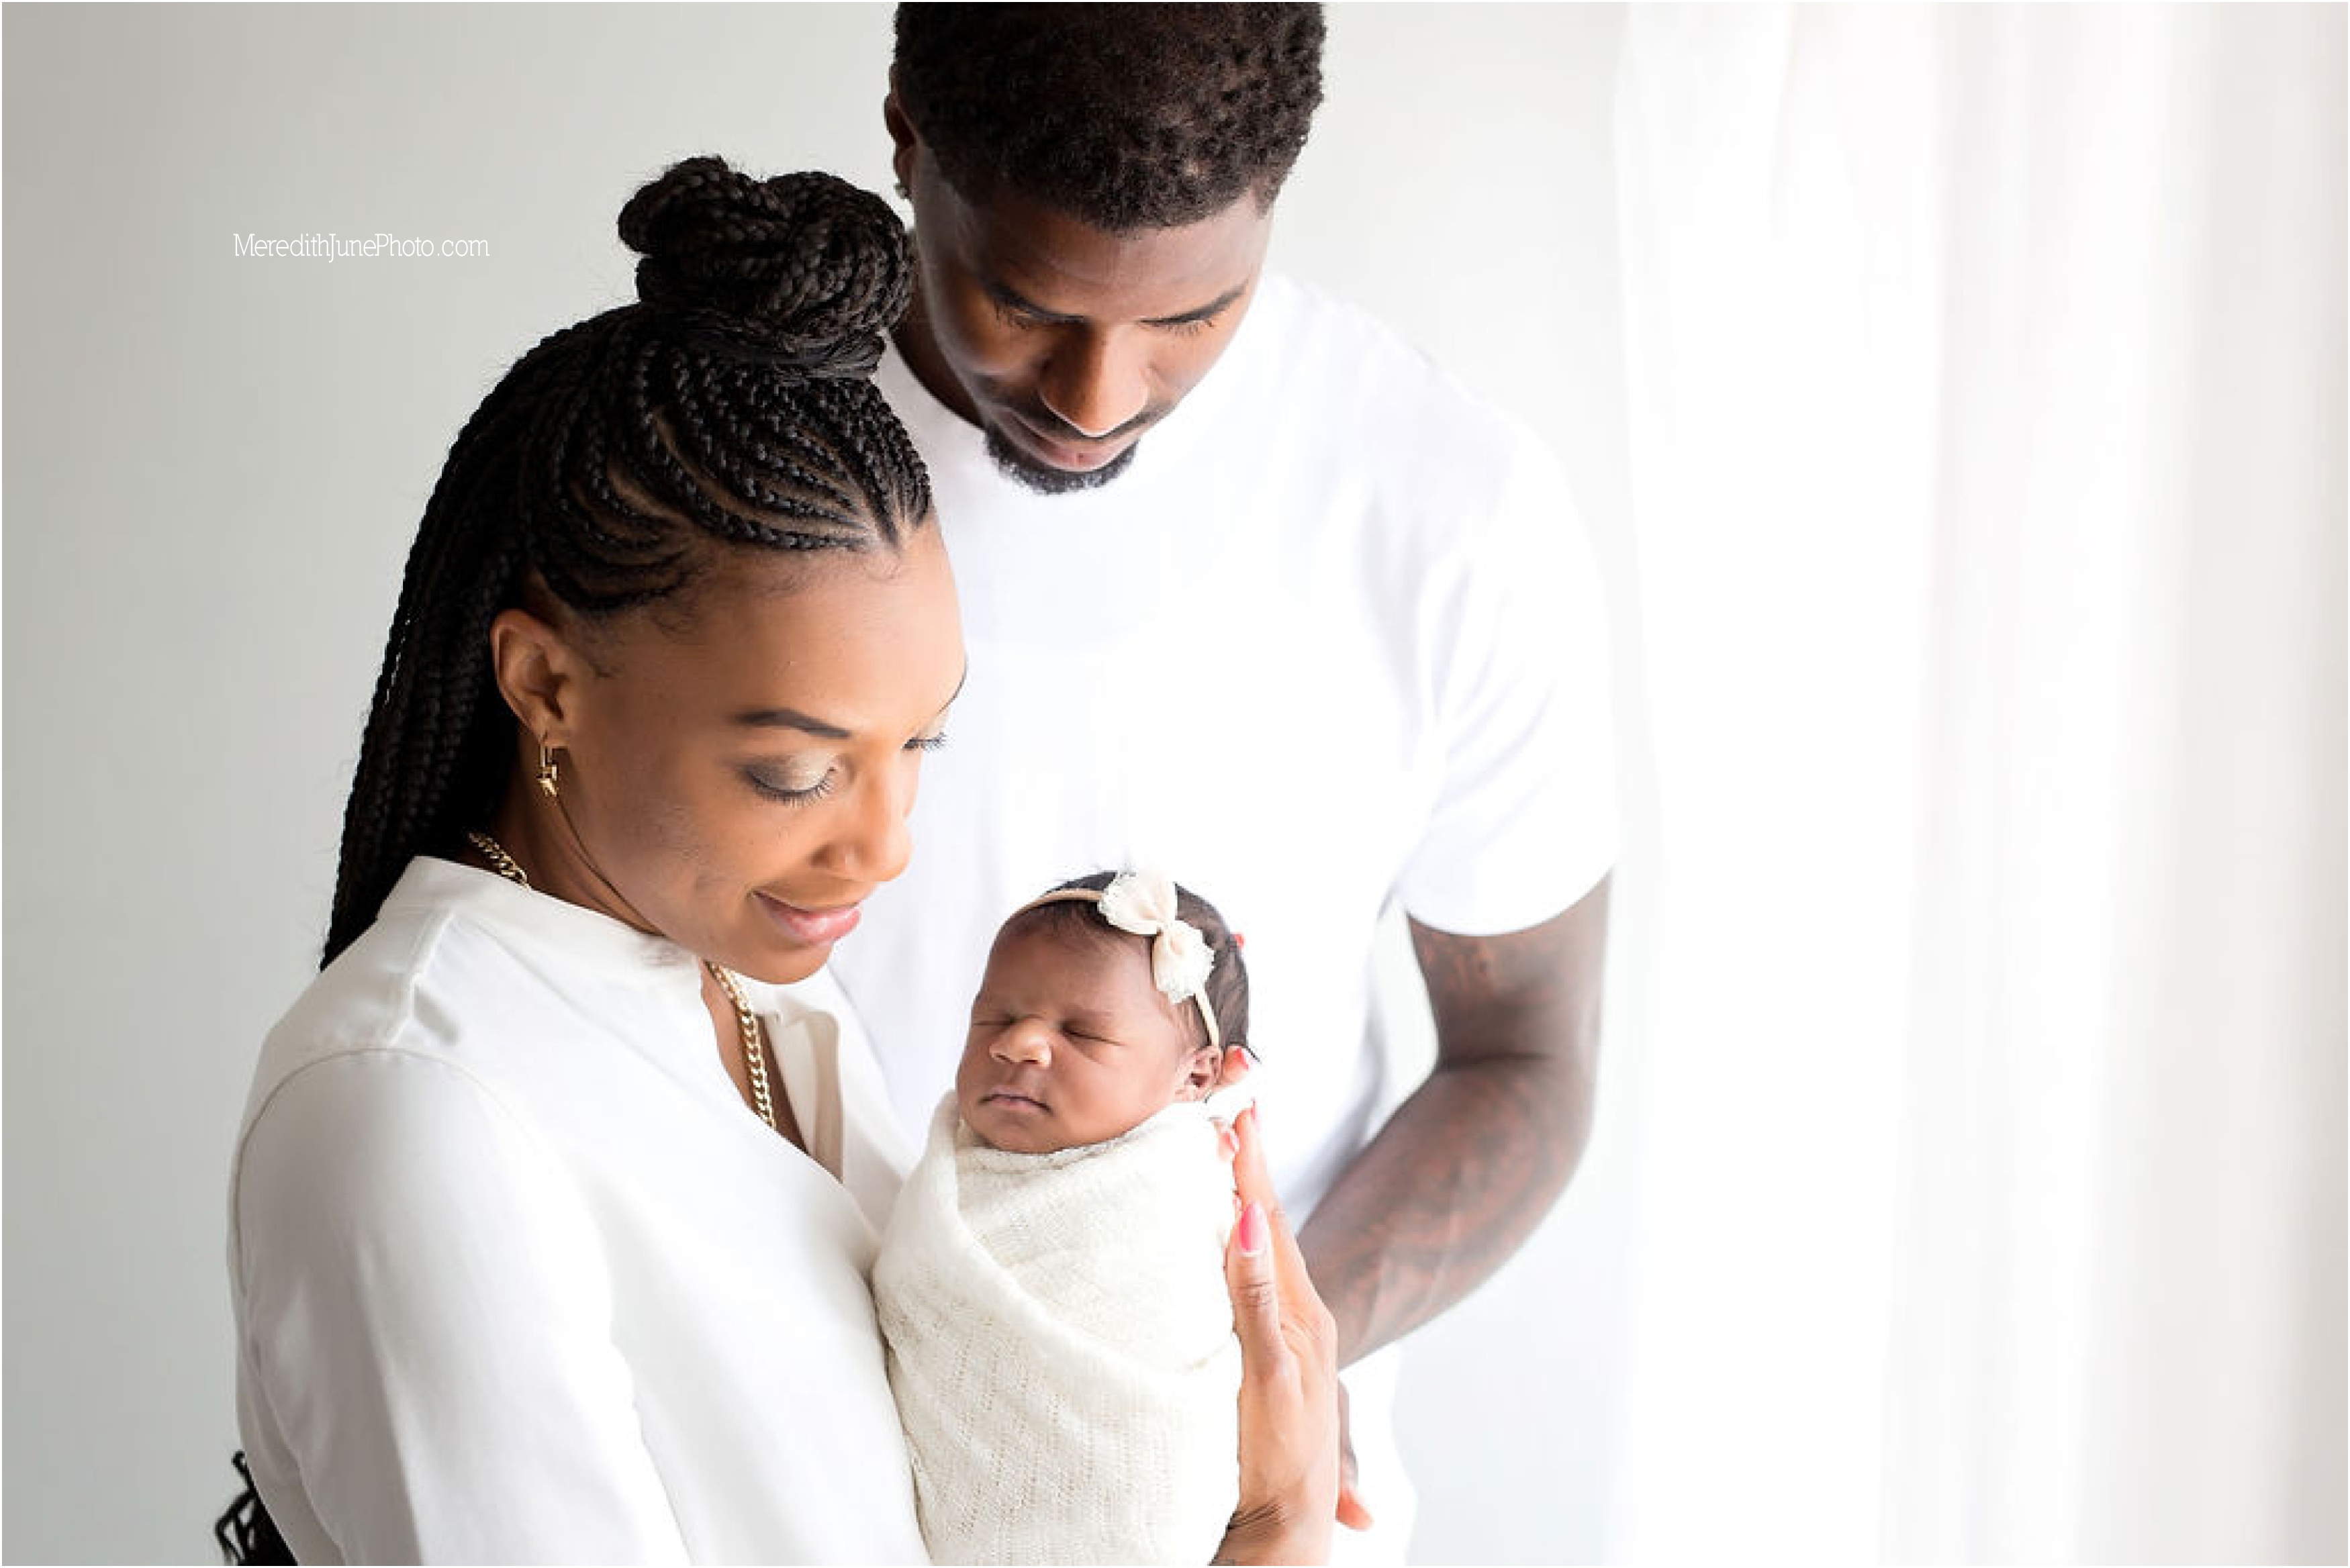 Newborn baby girl with her parents at Meredith June Photography